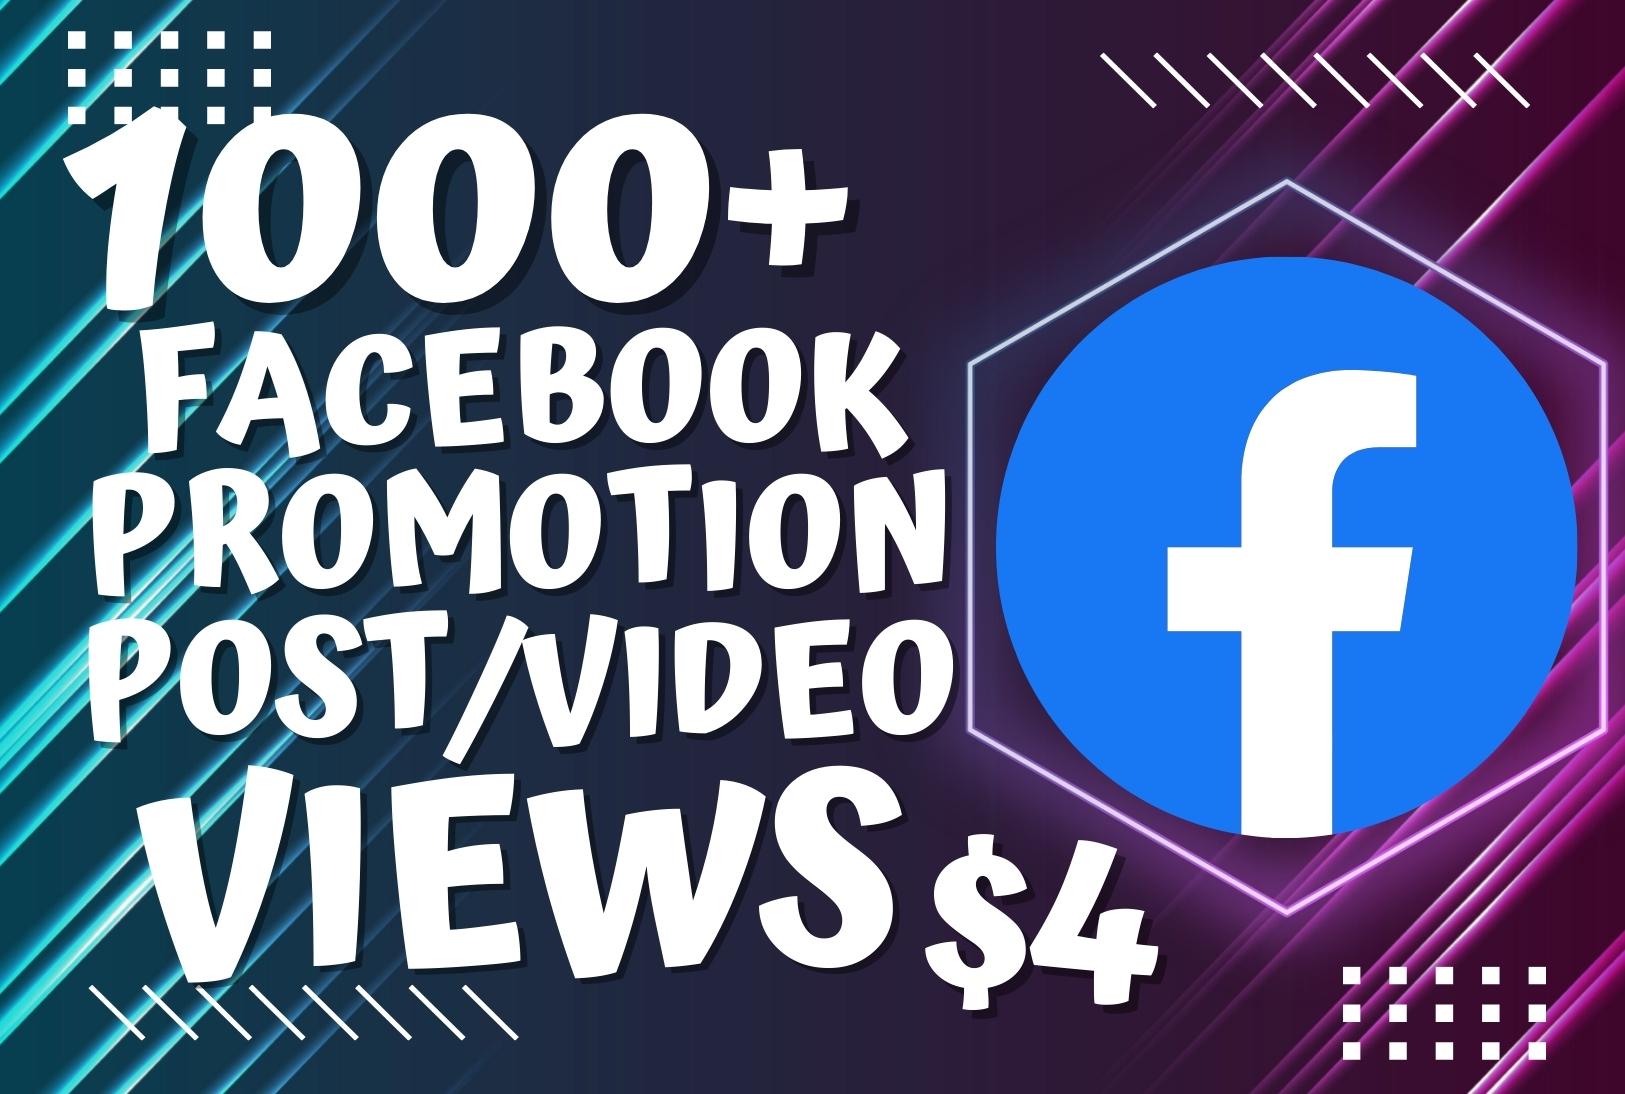 1000 High retention views on Facebook video Facebook post promotion and engagement